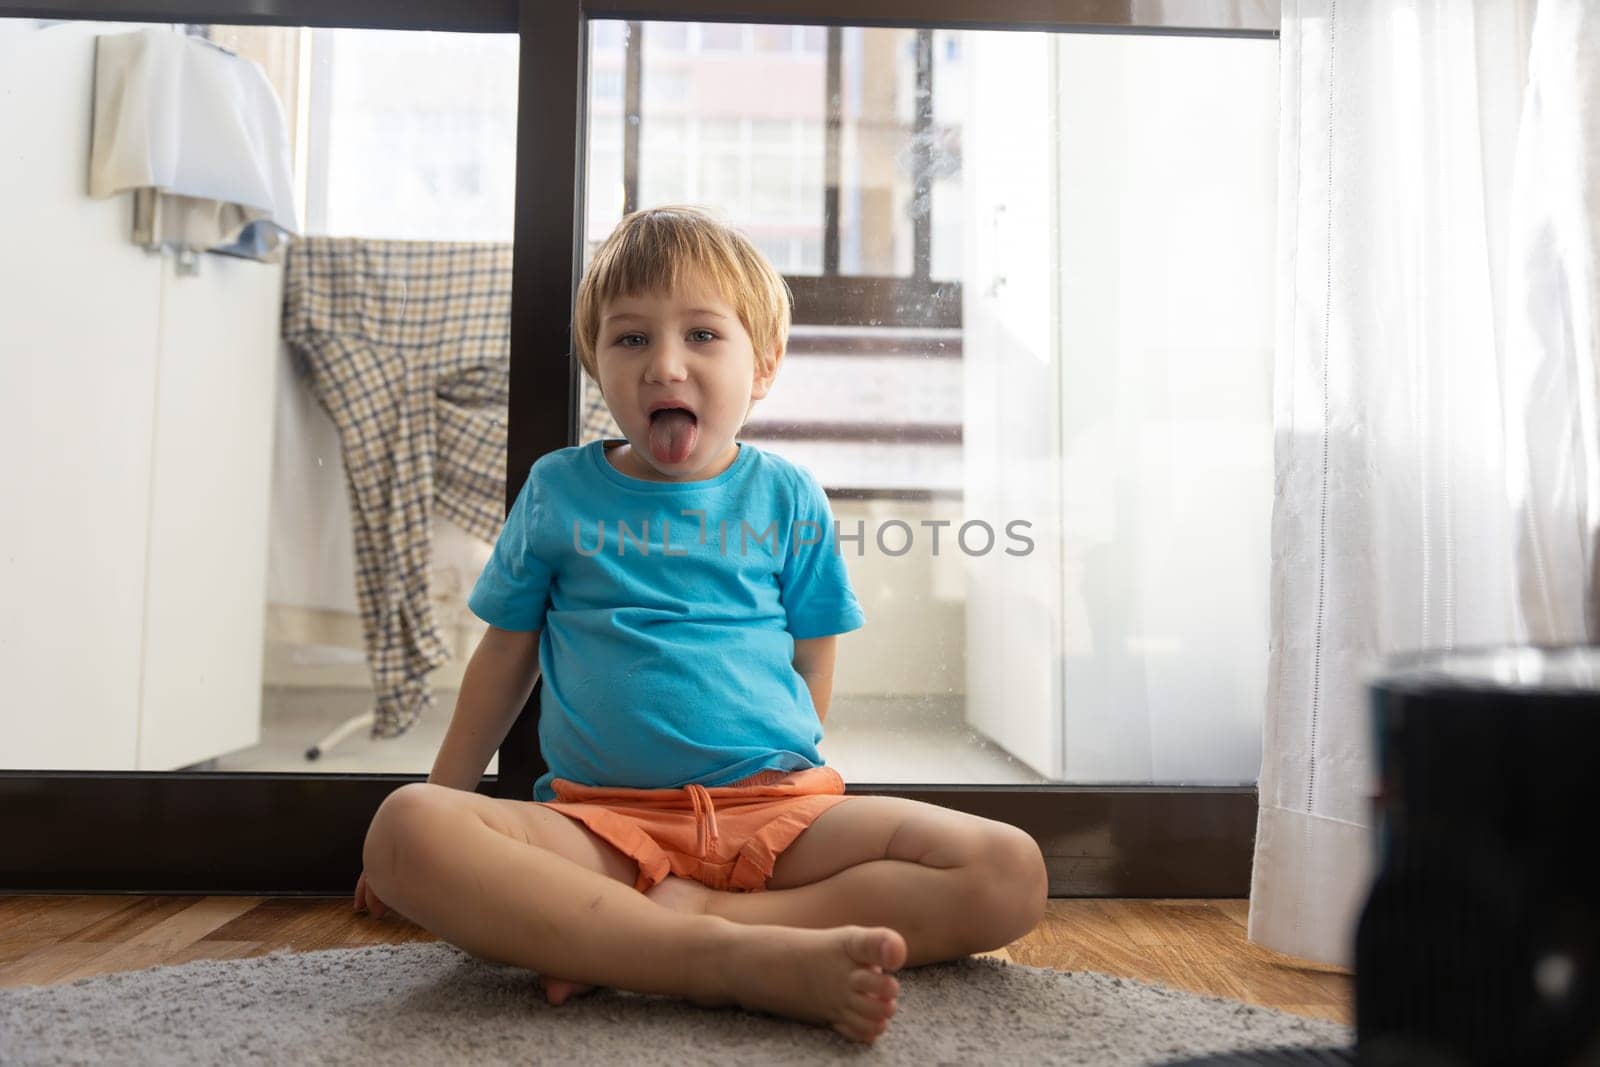 A little boy sitting on the floor making a funny face